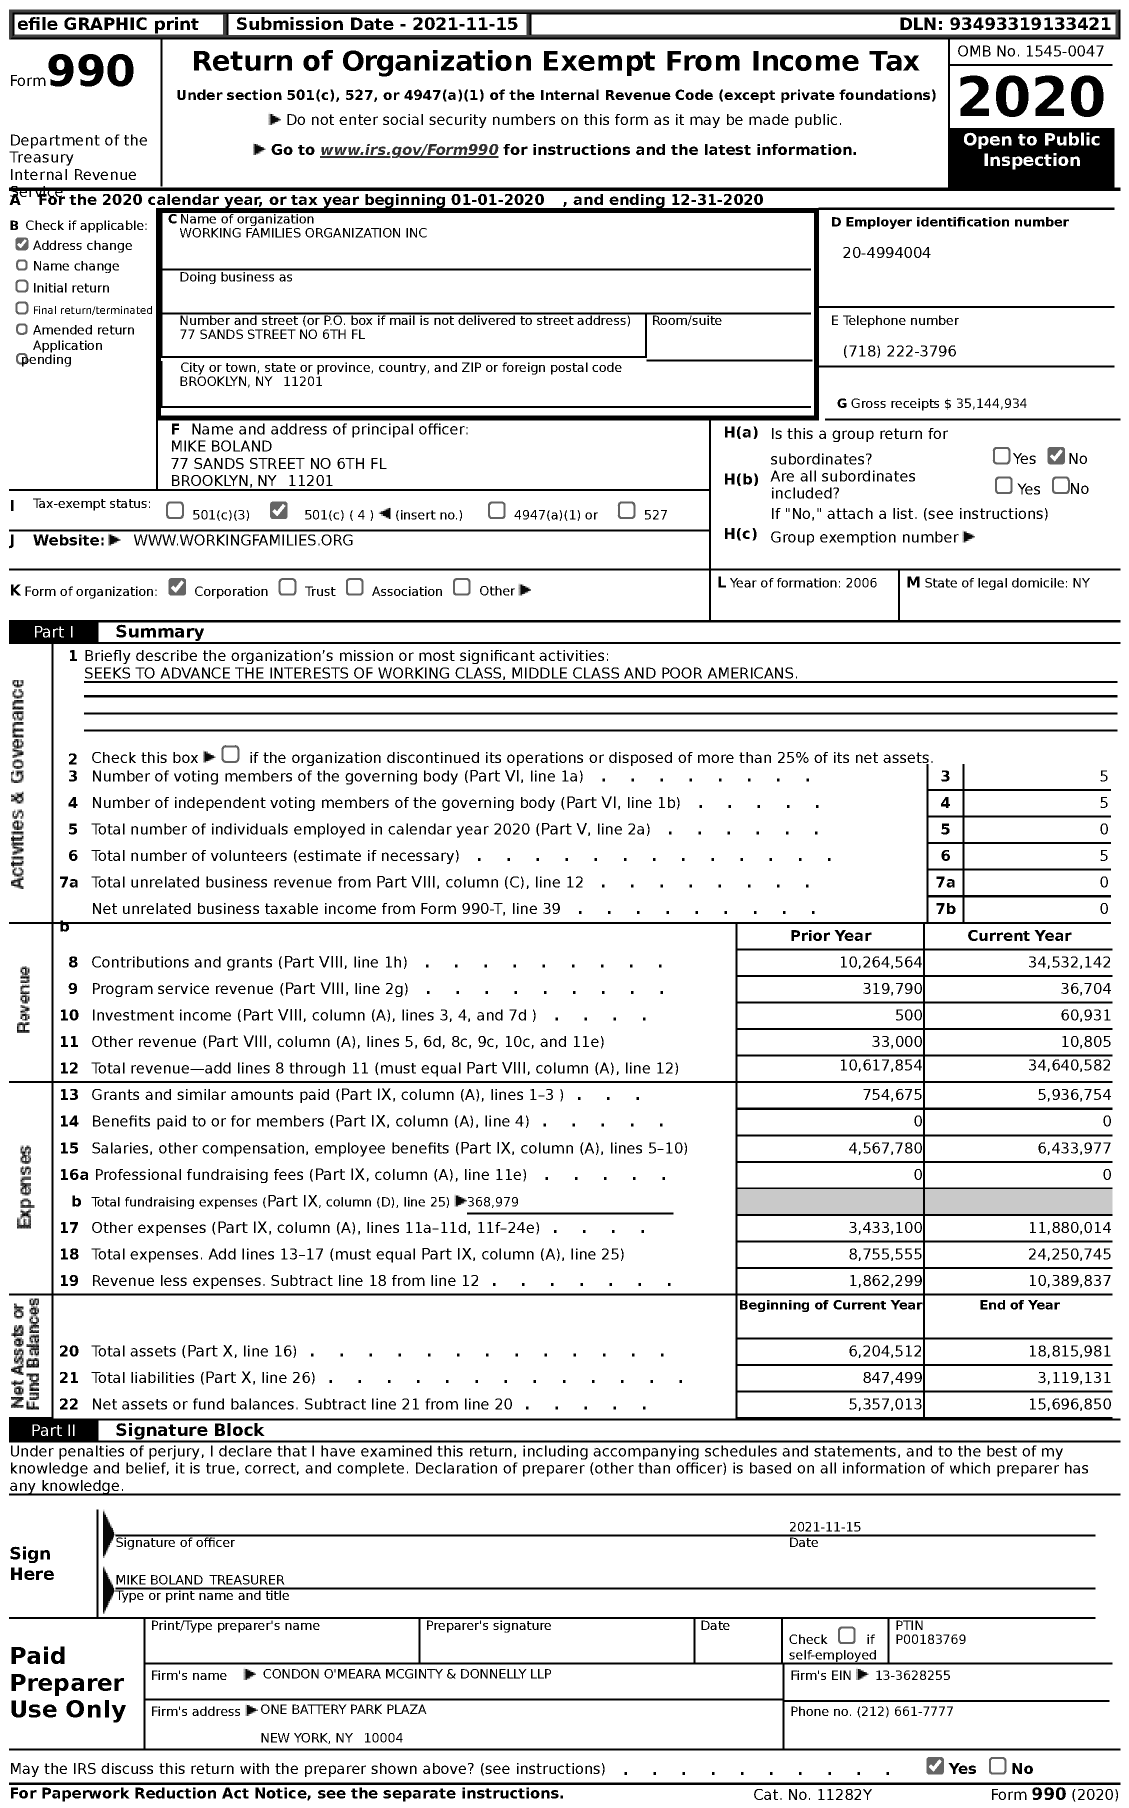 Image of first page of 2020 Form 990 for Working Families Organization (WFO)